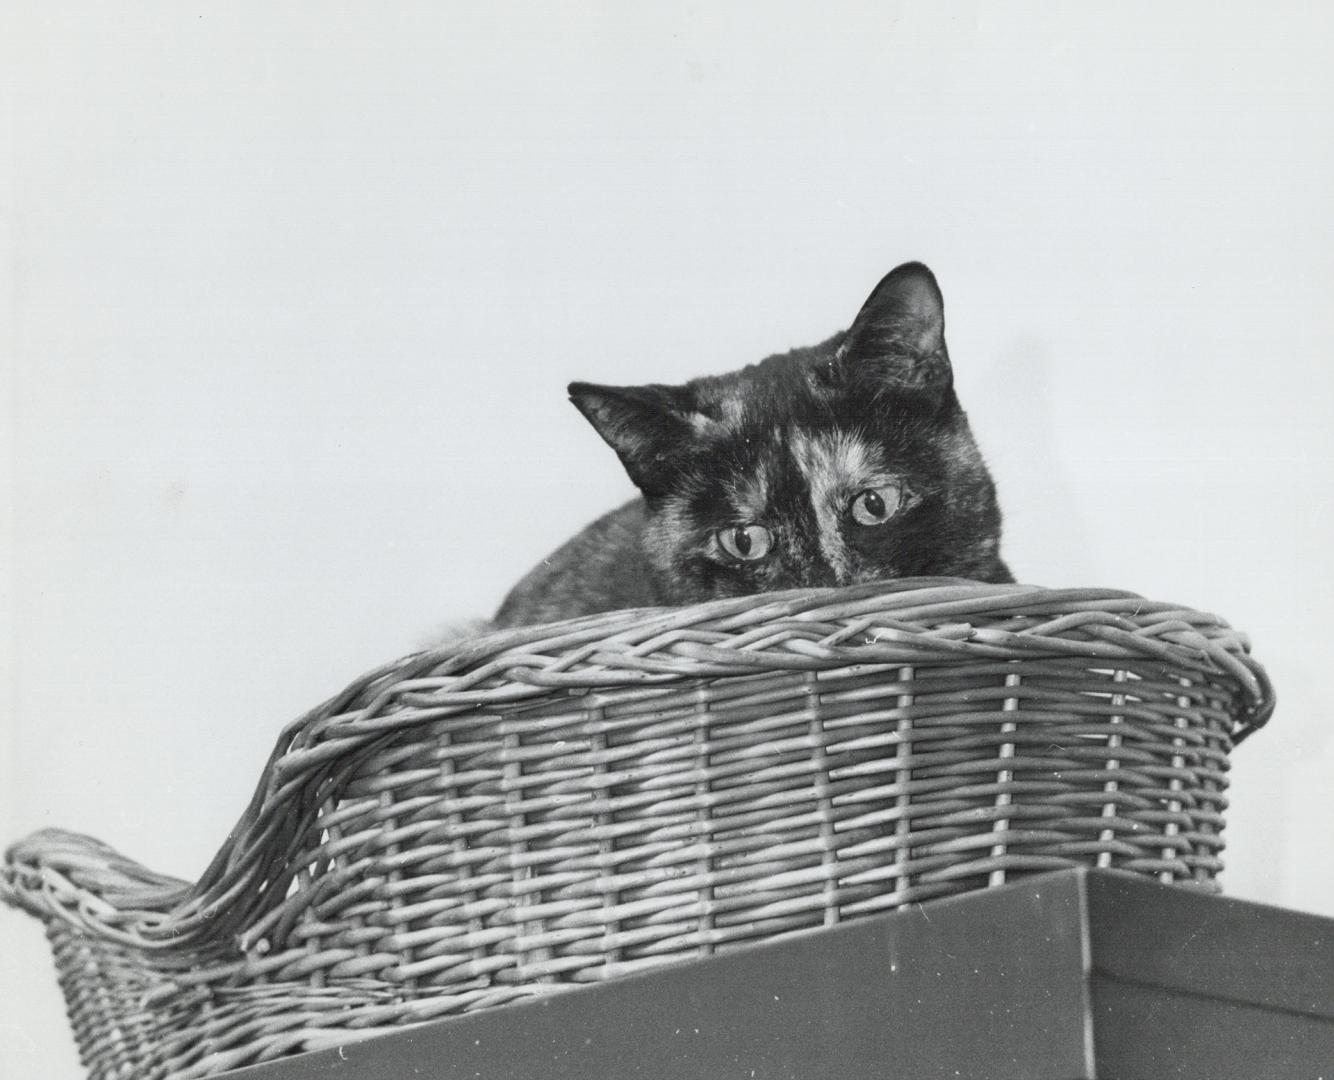 Linincy, the 9-year old cat, rests in its basket, Dr. Shulman